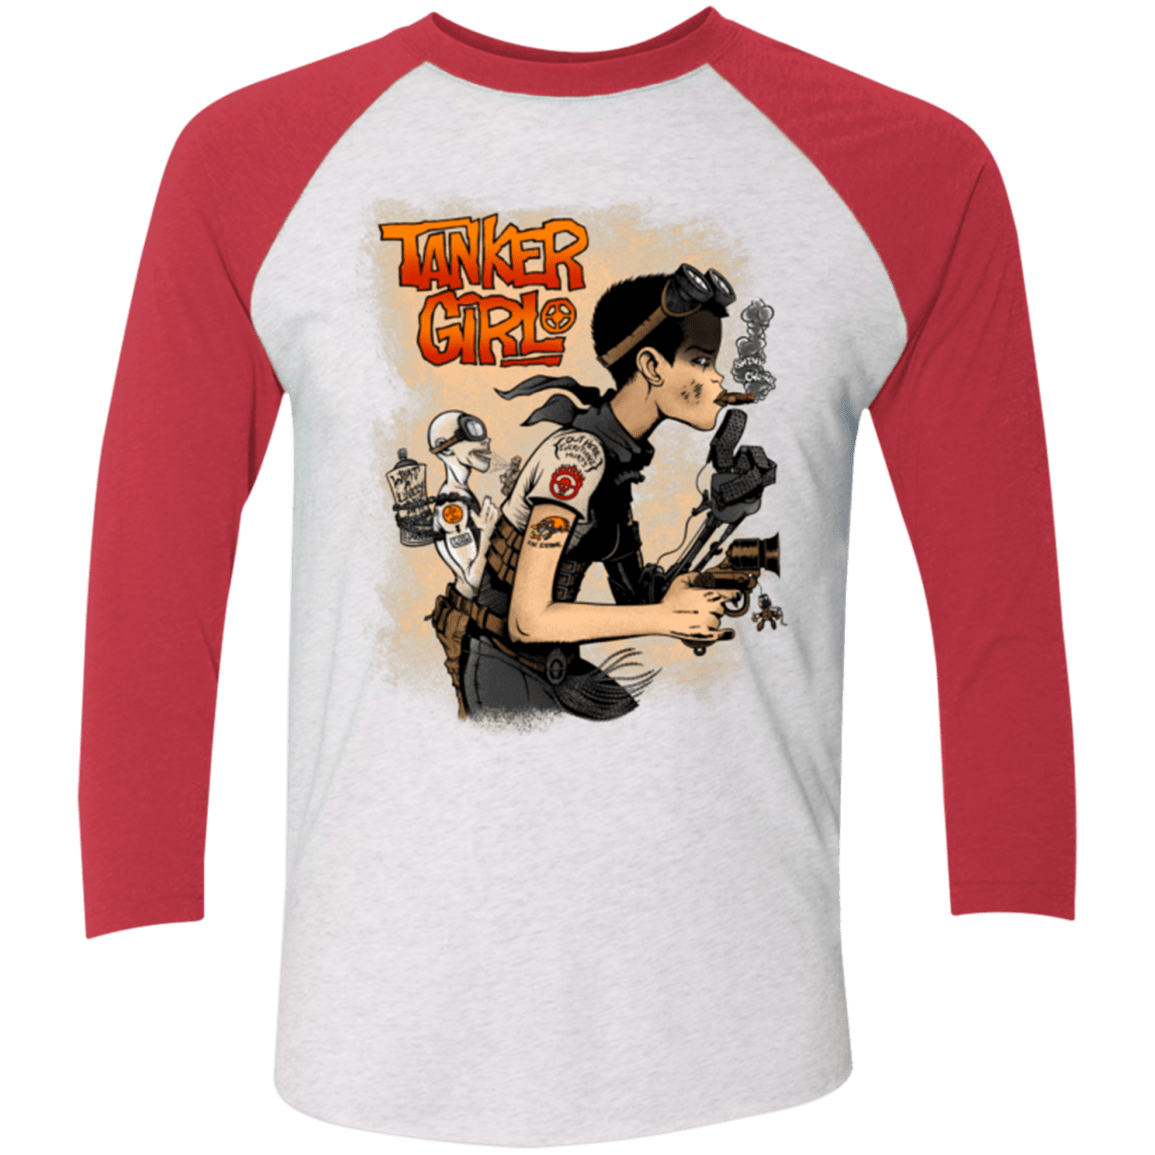 T-Shirts Heather White/Vintage Red / X-Small Tanker Girl Triblend 3/4 Sleeve